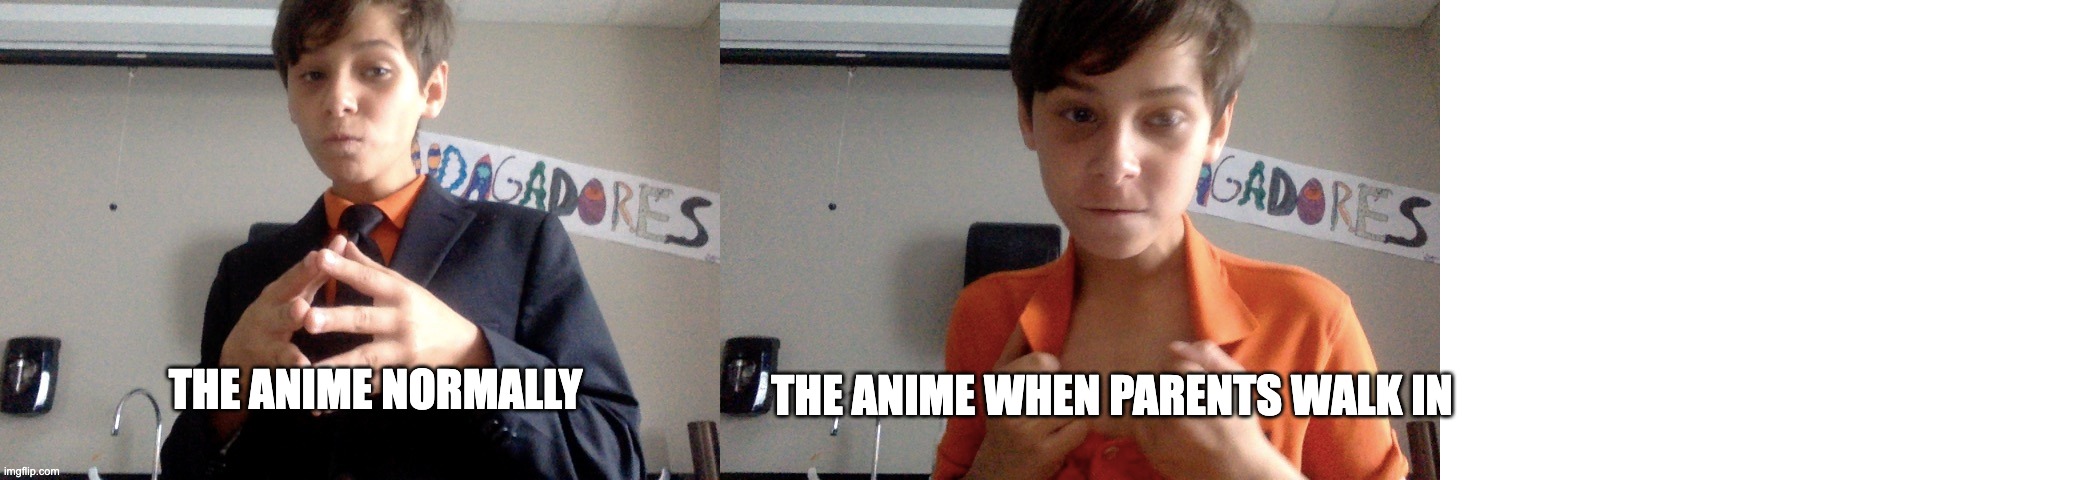 THE ANIME WHEN PARENTS WALK IN; THE ANIME NORMALLY | made w/ Imgflip meme maker